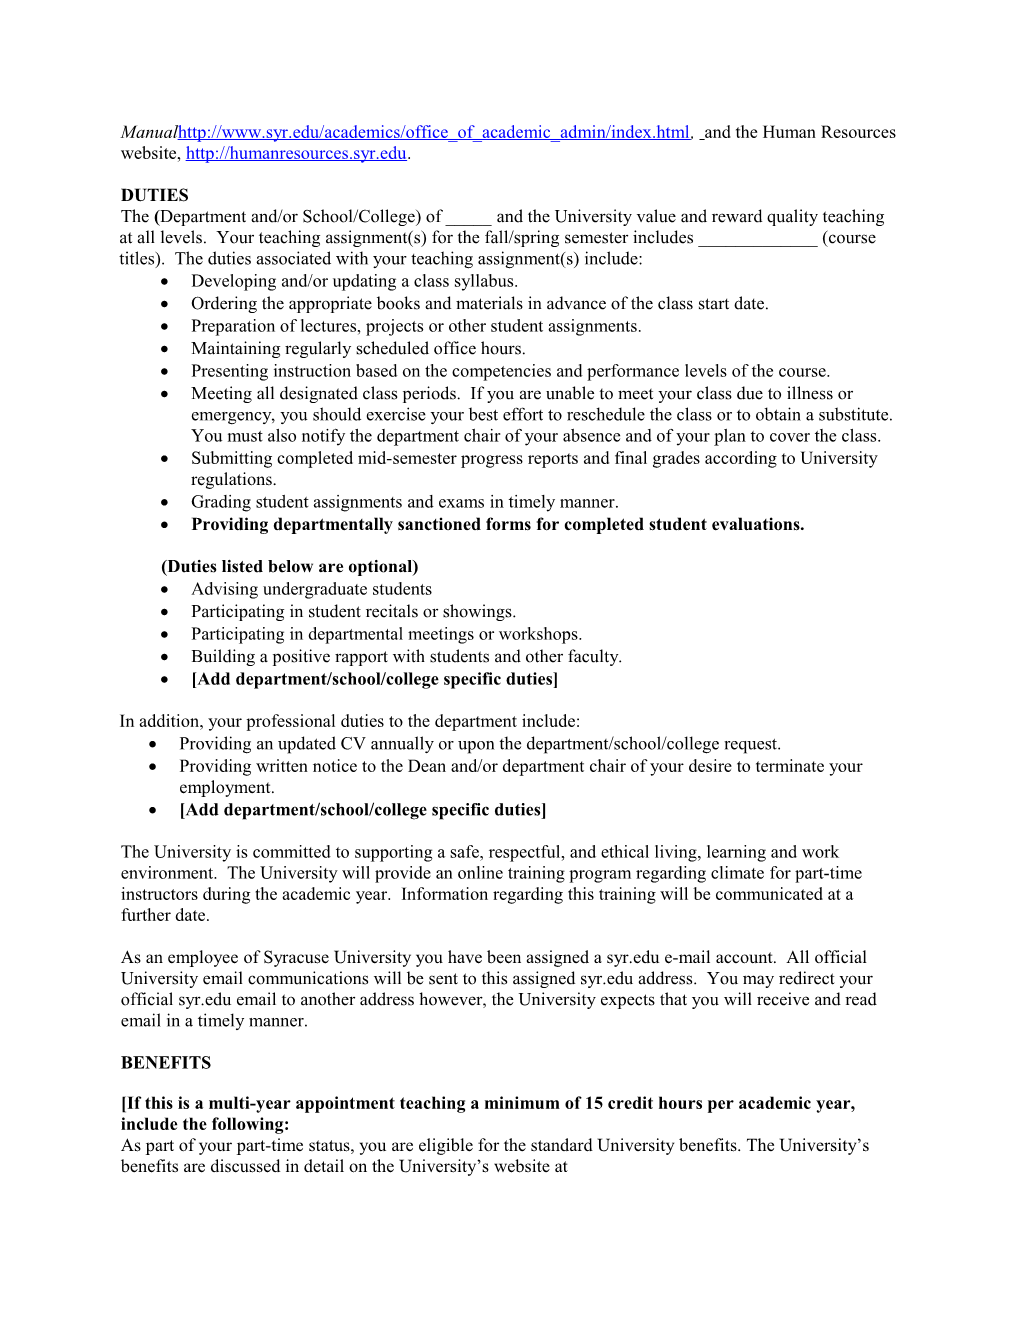 Part-Time Faculty New Appointment Letter